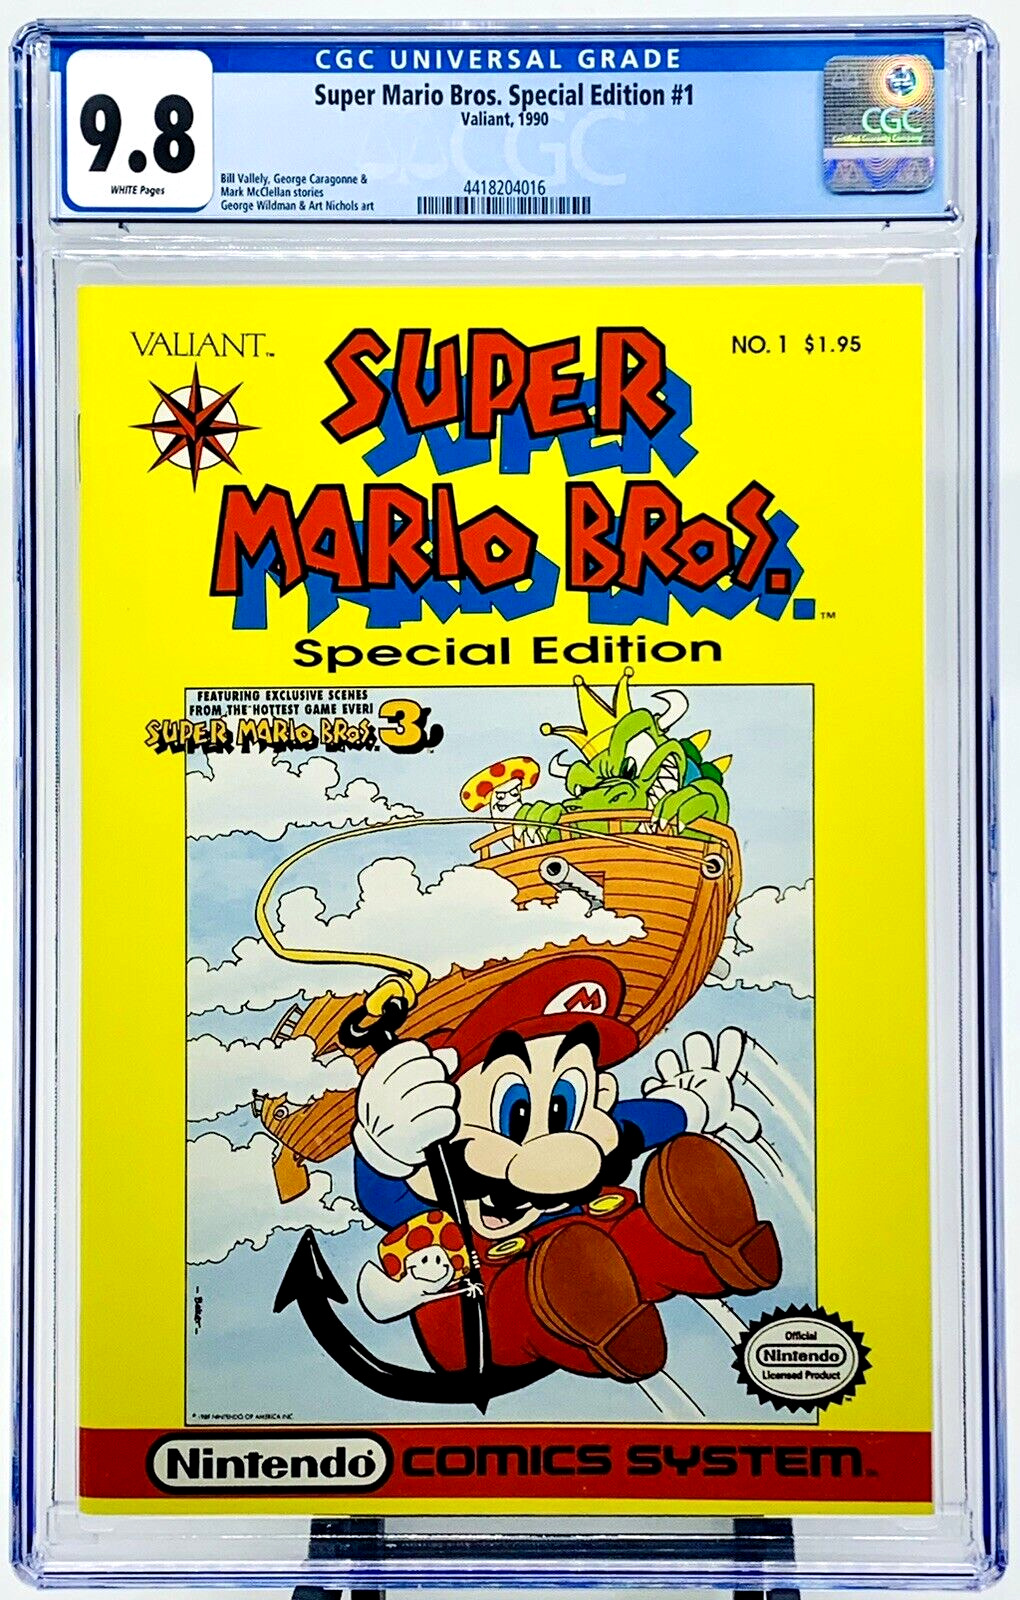 SUPER MARIO BROS. SPECIAL EDITION #1 CGC 9.8 WHITE PAGES VALIANT 1990 CLEAR CASE